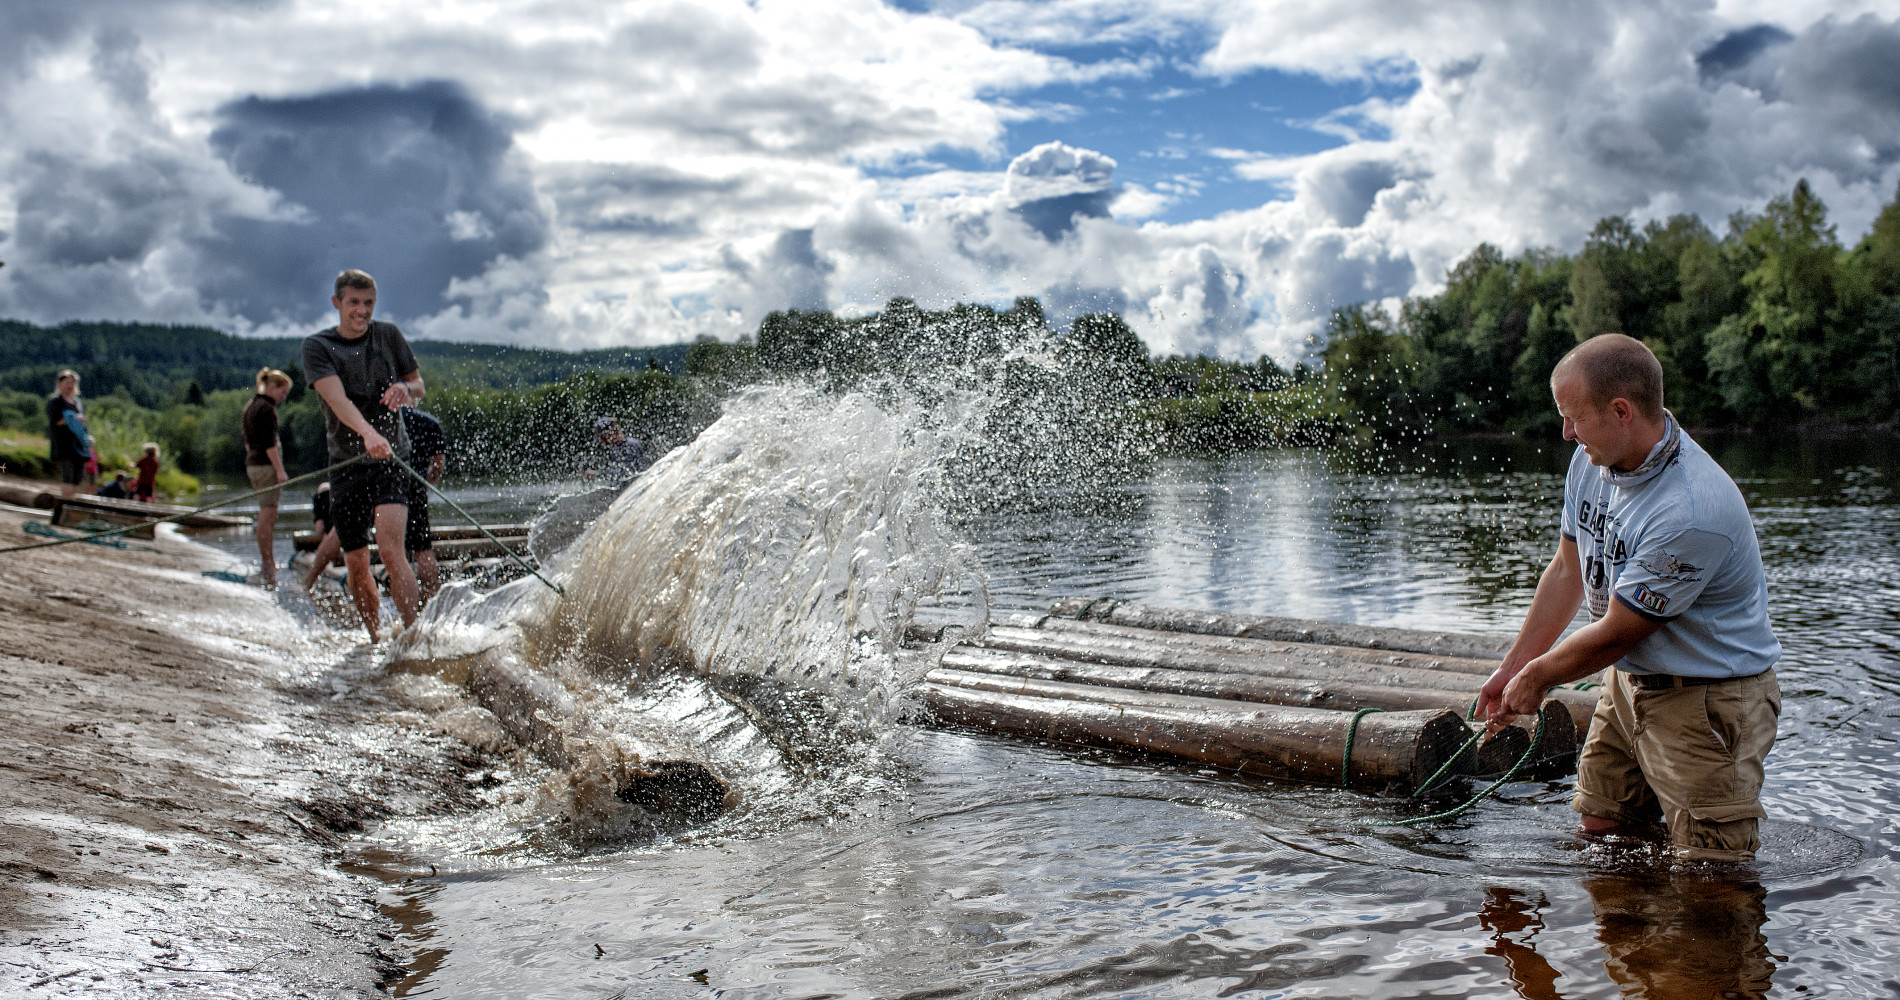 Learn how to build your own raft in Sweden